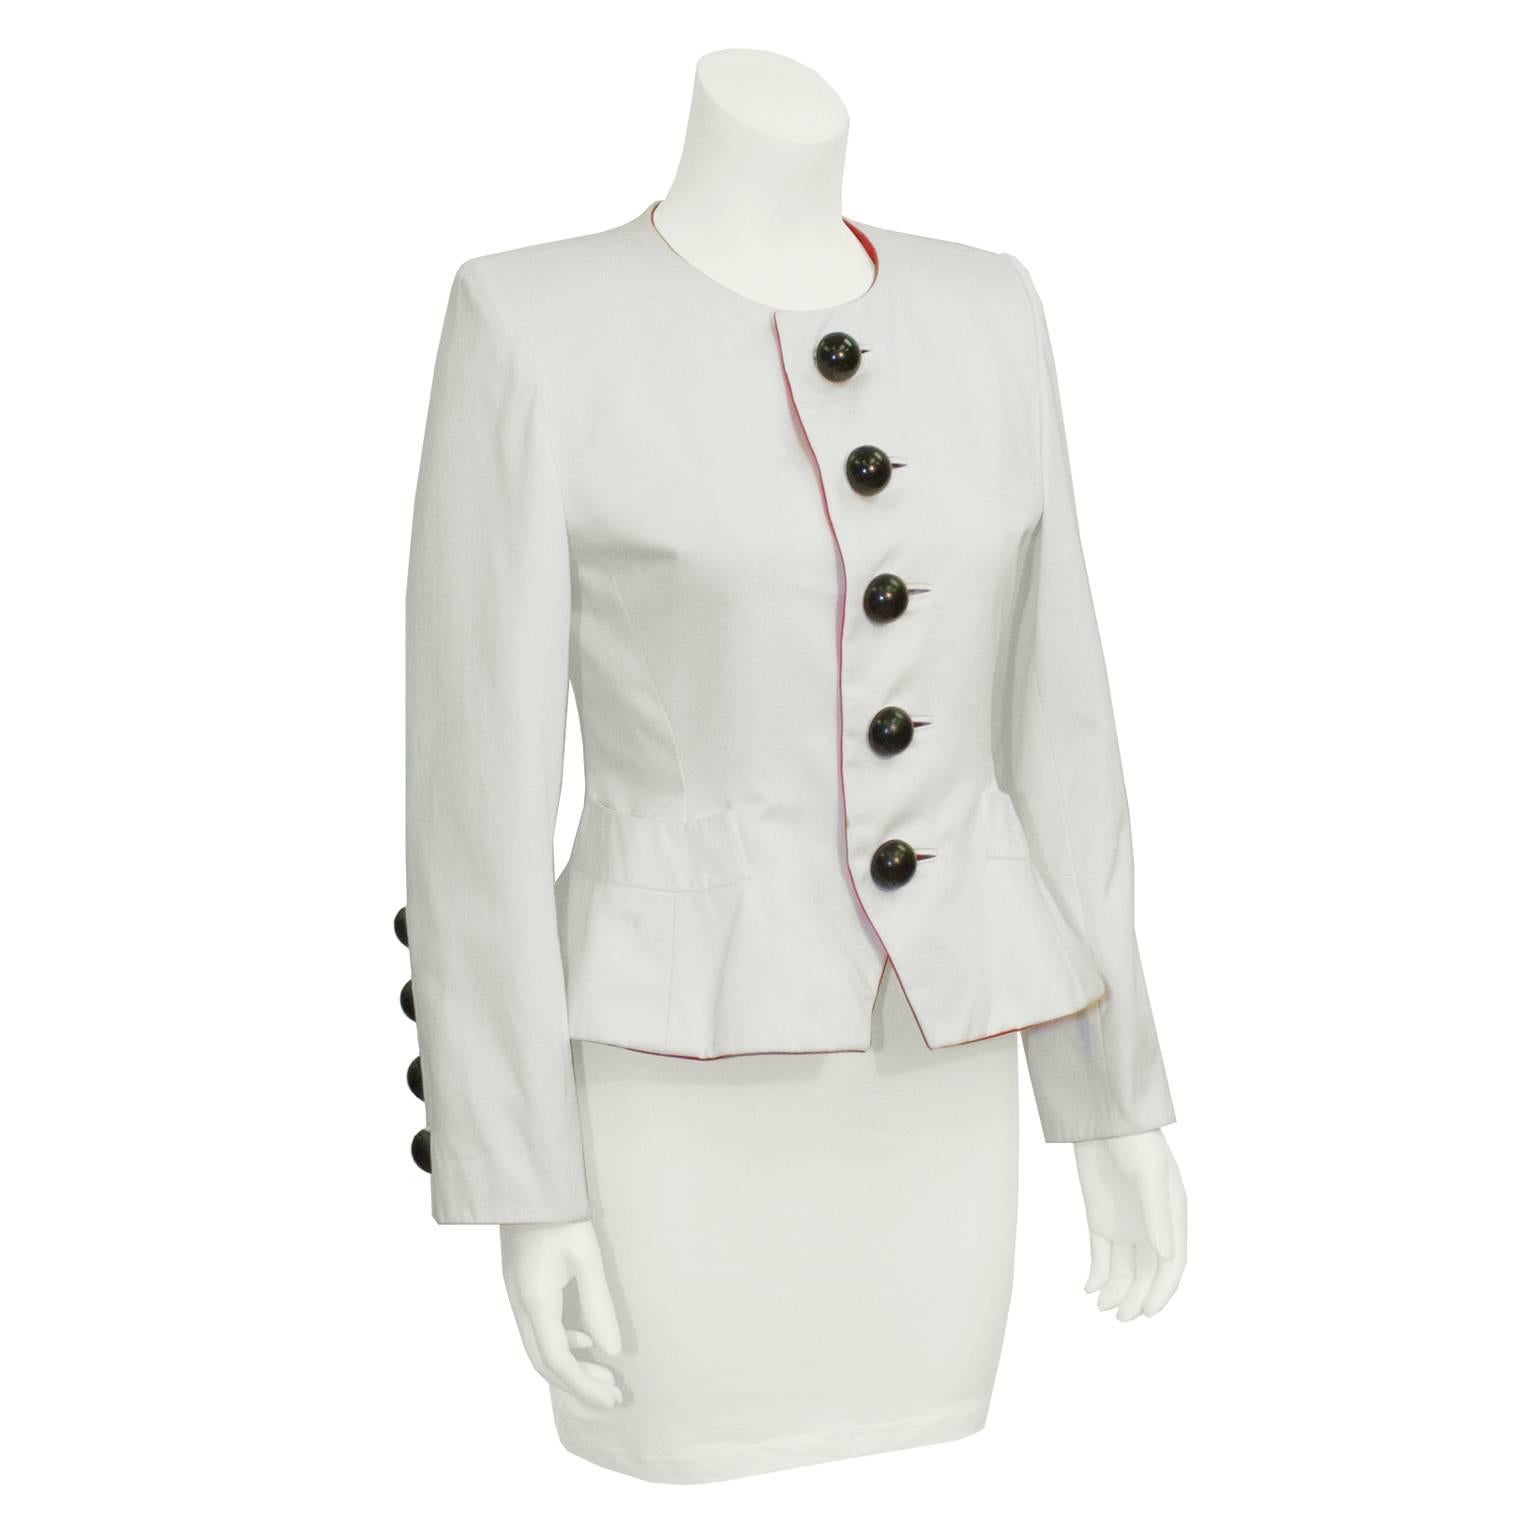 Chic Yves Saint Laurent white cotton jacket from the early 80's. Collarless, with large black dome shaped buttons down center and slash pockets on each hip. Both sleeves have four large dome buttons at wrist. Red interior trim with a ivory silk